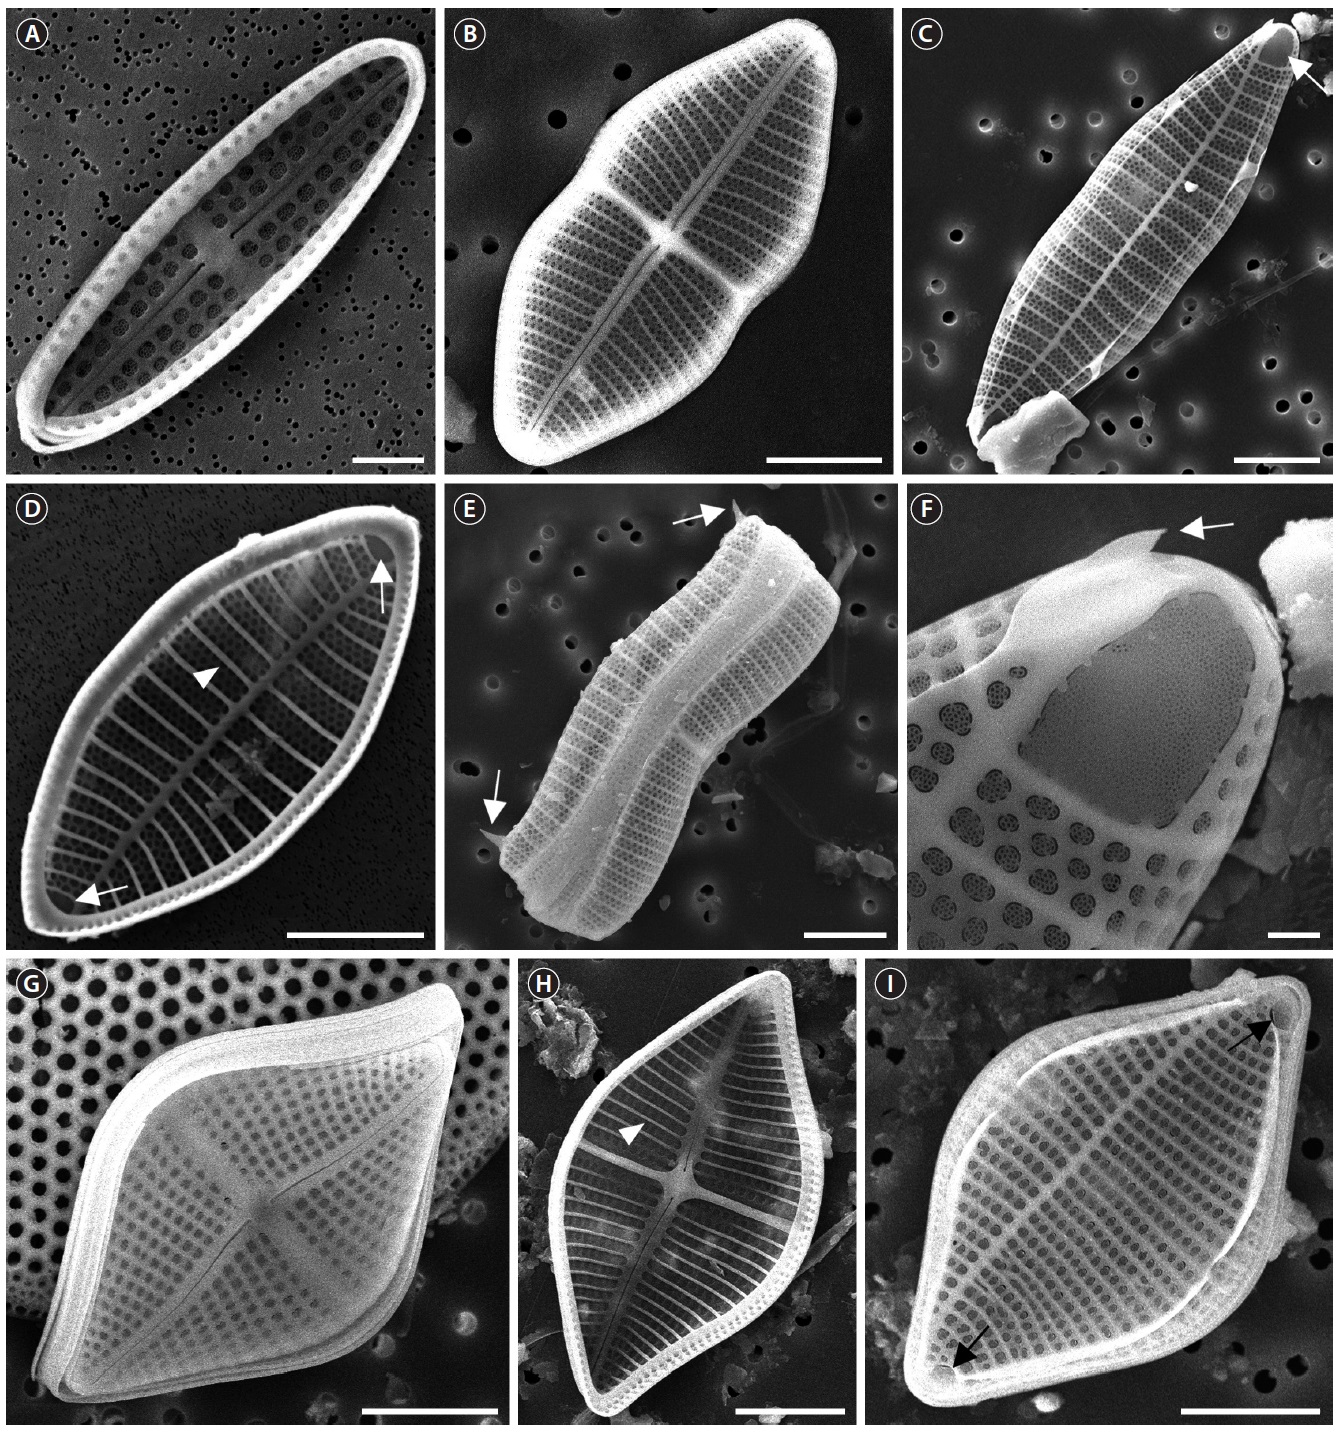 SEM microphotographs of the Achnanthes spp. (A) Internal RV of the A. parvula. (B) RV of the A. subconstricta. (C) ARV with terminal obiculi (arrow)
of the A. subconstricta. (D) Internal ARV with terminal obiculi (arrows) and costae (arrowhead) of the A. subconstricta. (E) Girdle view with terminal spines
(arrows) of the ARV of the A. subconstricta. (F) Terminal obiculi and spine (arrow) of the A. subconstricta. (G) RV of the A. yaquinensis. (H) Internal RV with
costae (arrow) of the A. yaquinensis. (I) ARV with terminal obiculi (arrows) of the A. yaquinensis. Scale bars represent: A, 2 μm; B-E & G-I, 10 μm; F, 1 μm.